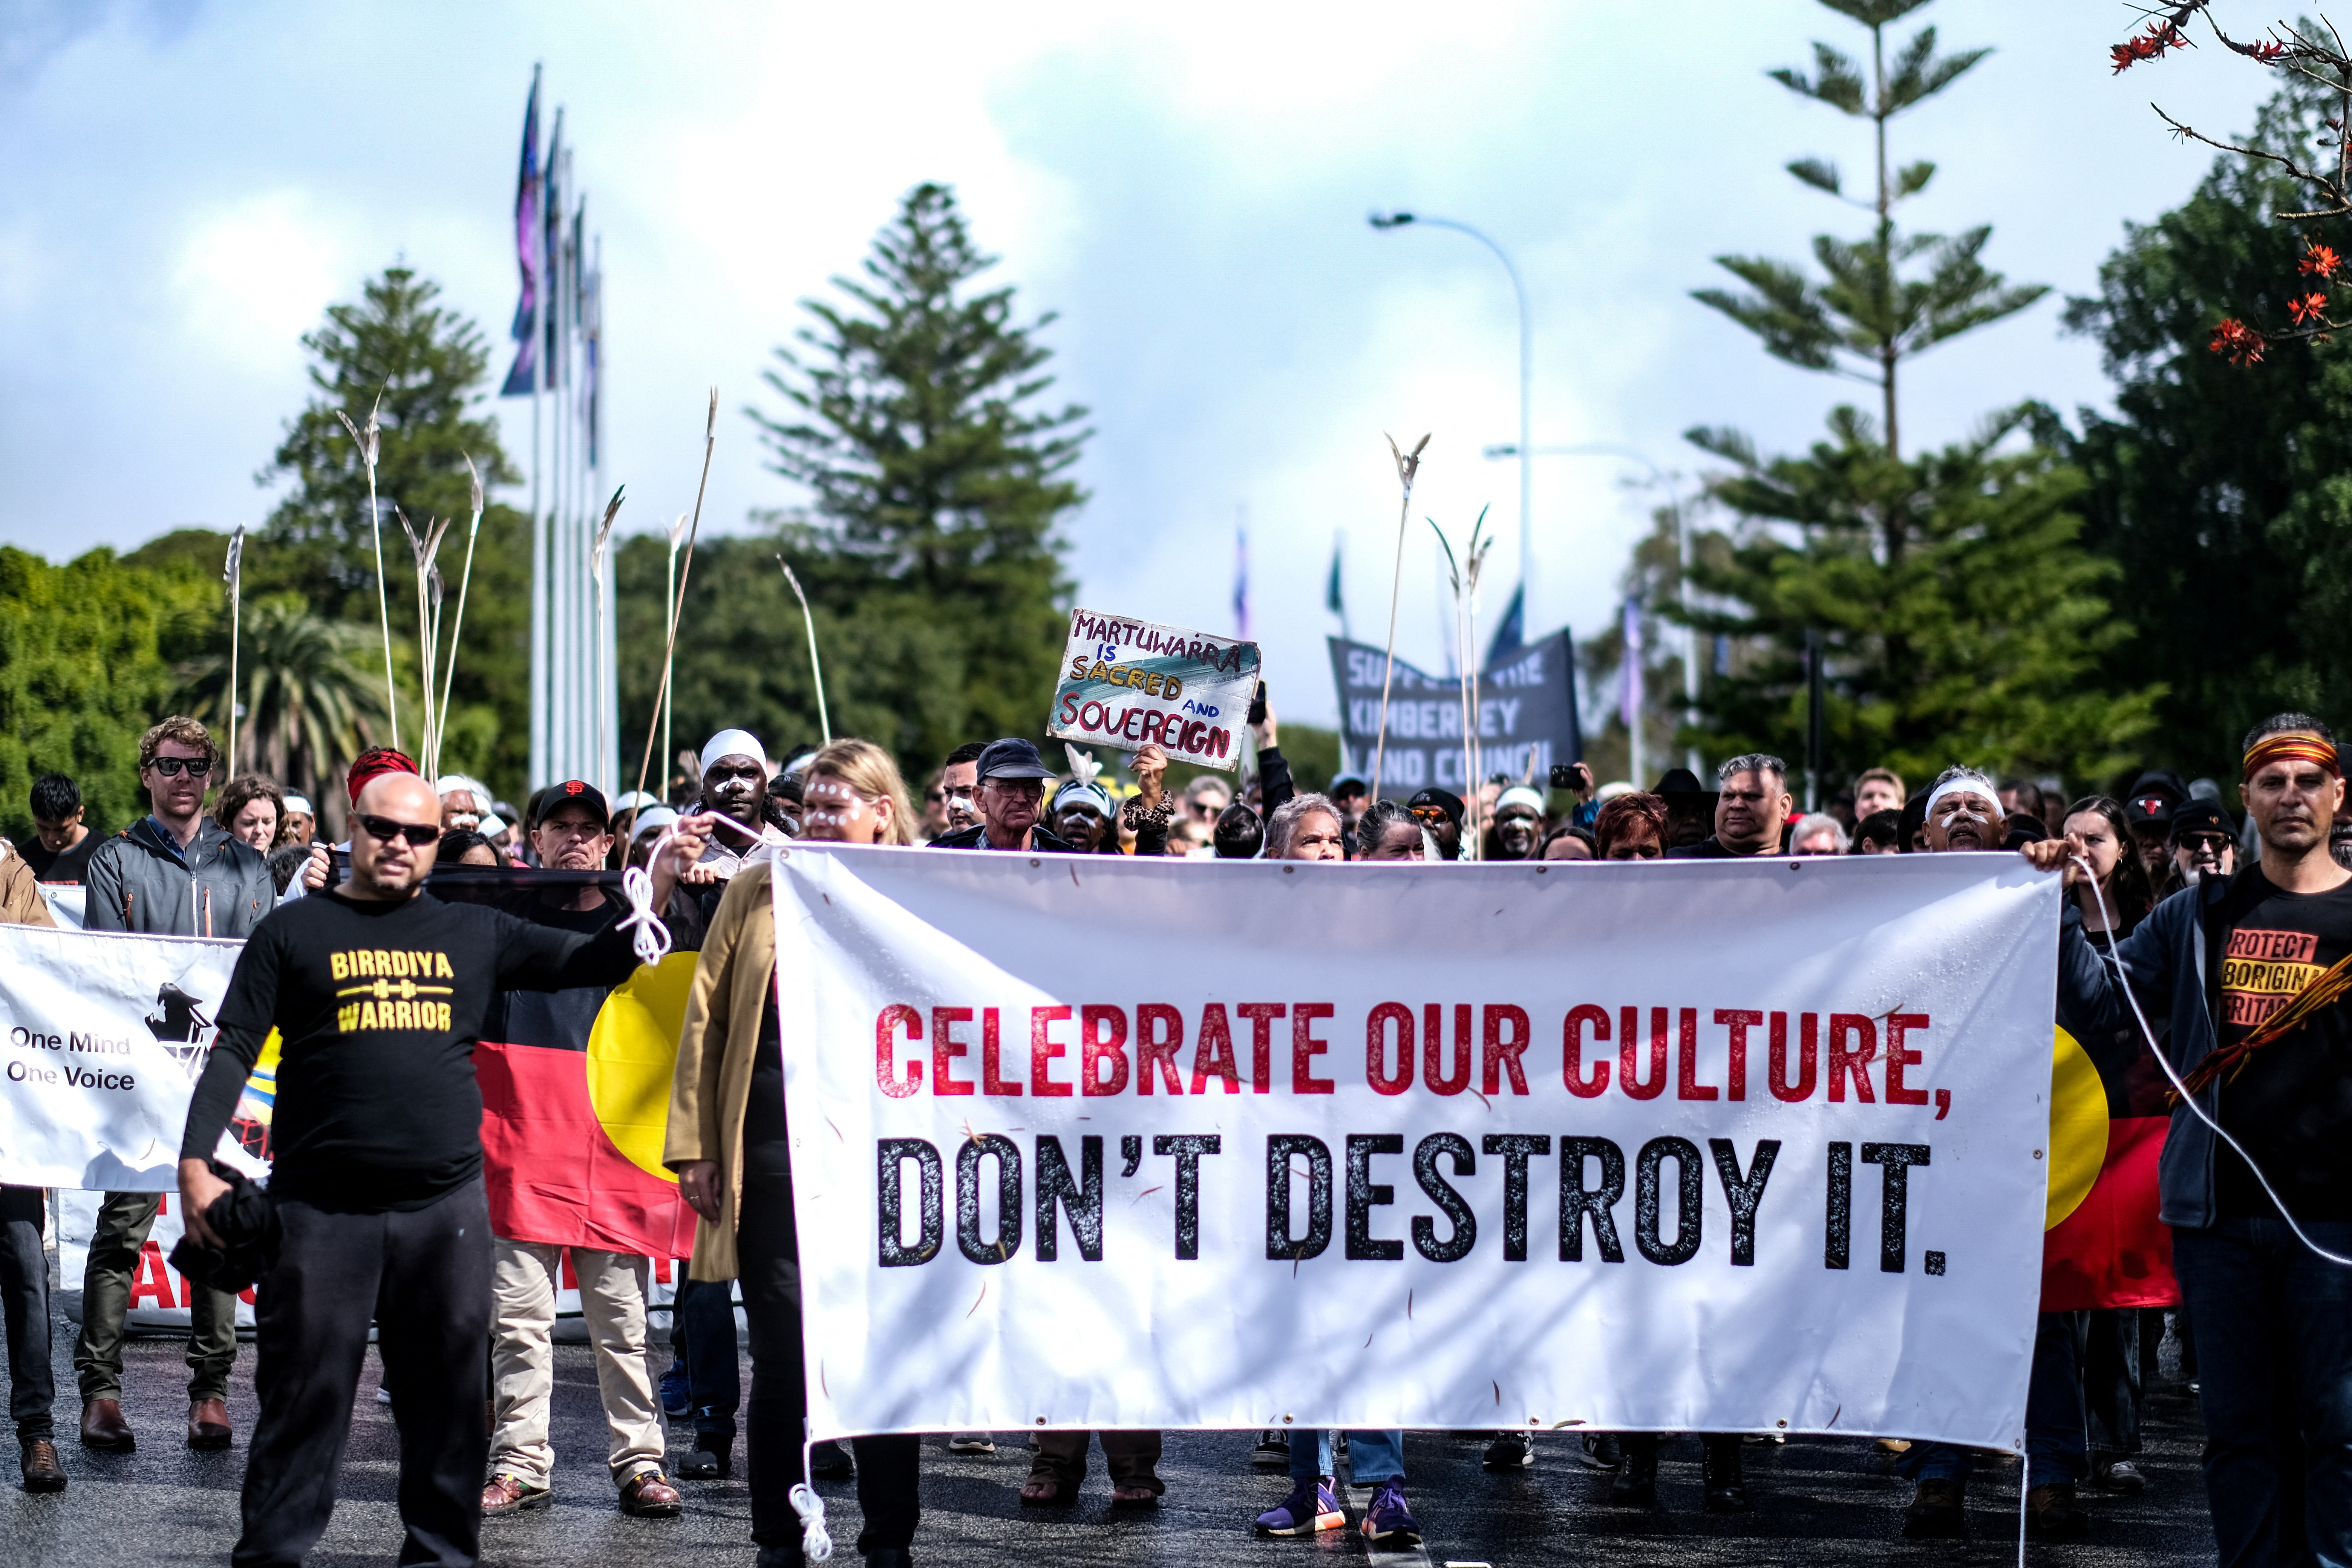 Aboriginal groups march against planned changes in heritage protection laws, in Perth